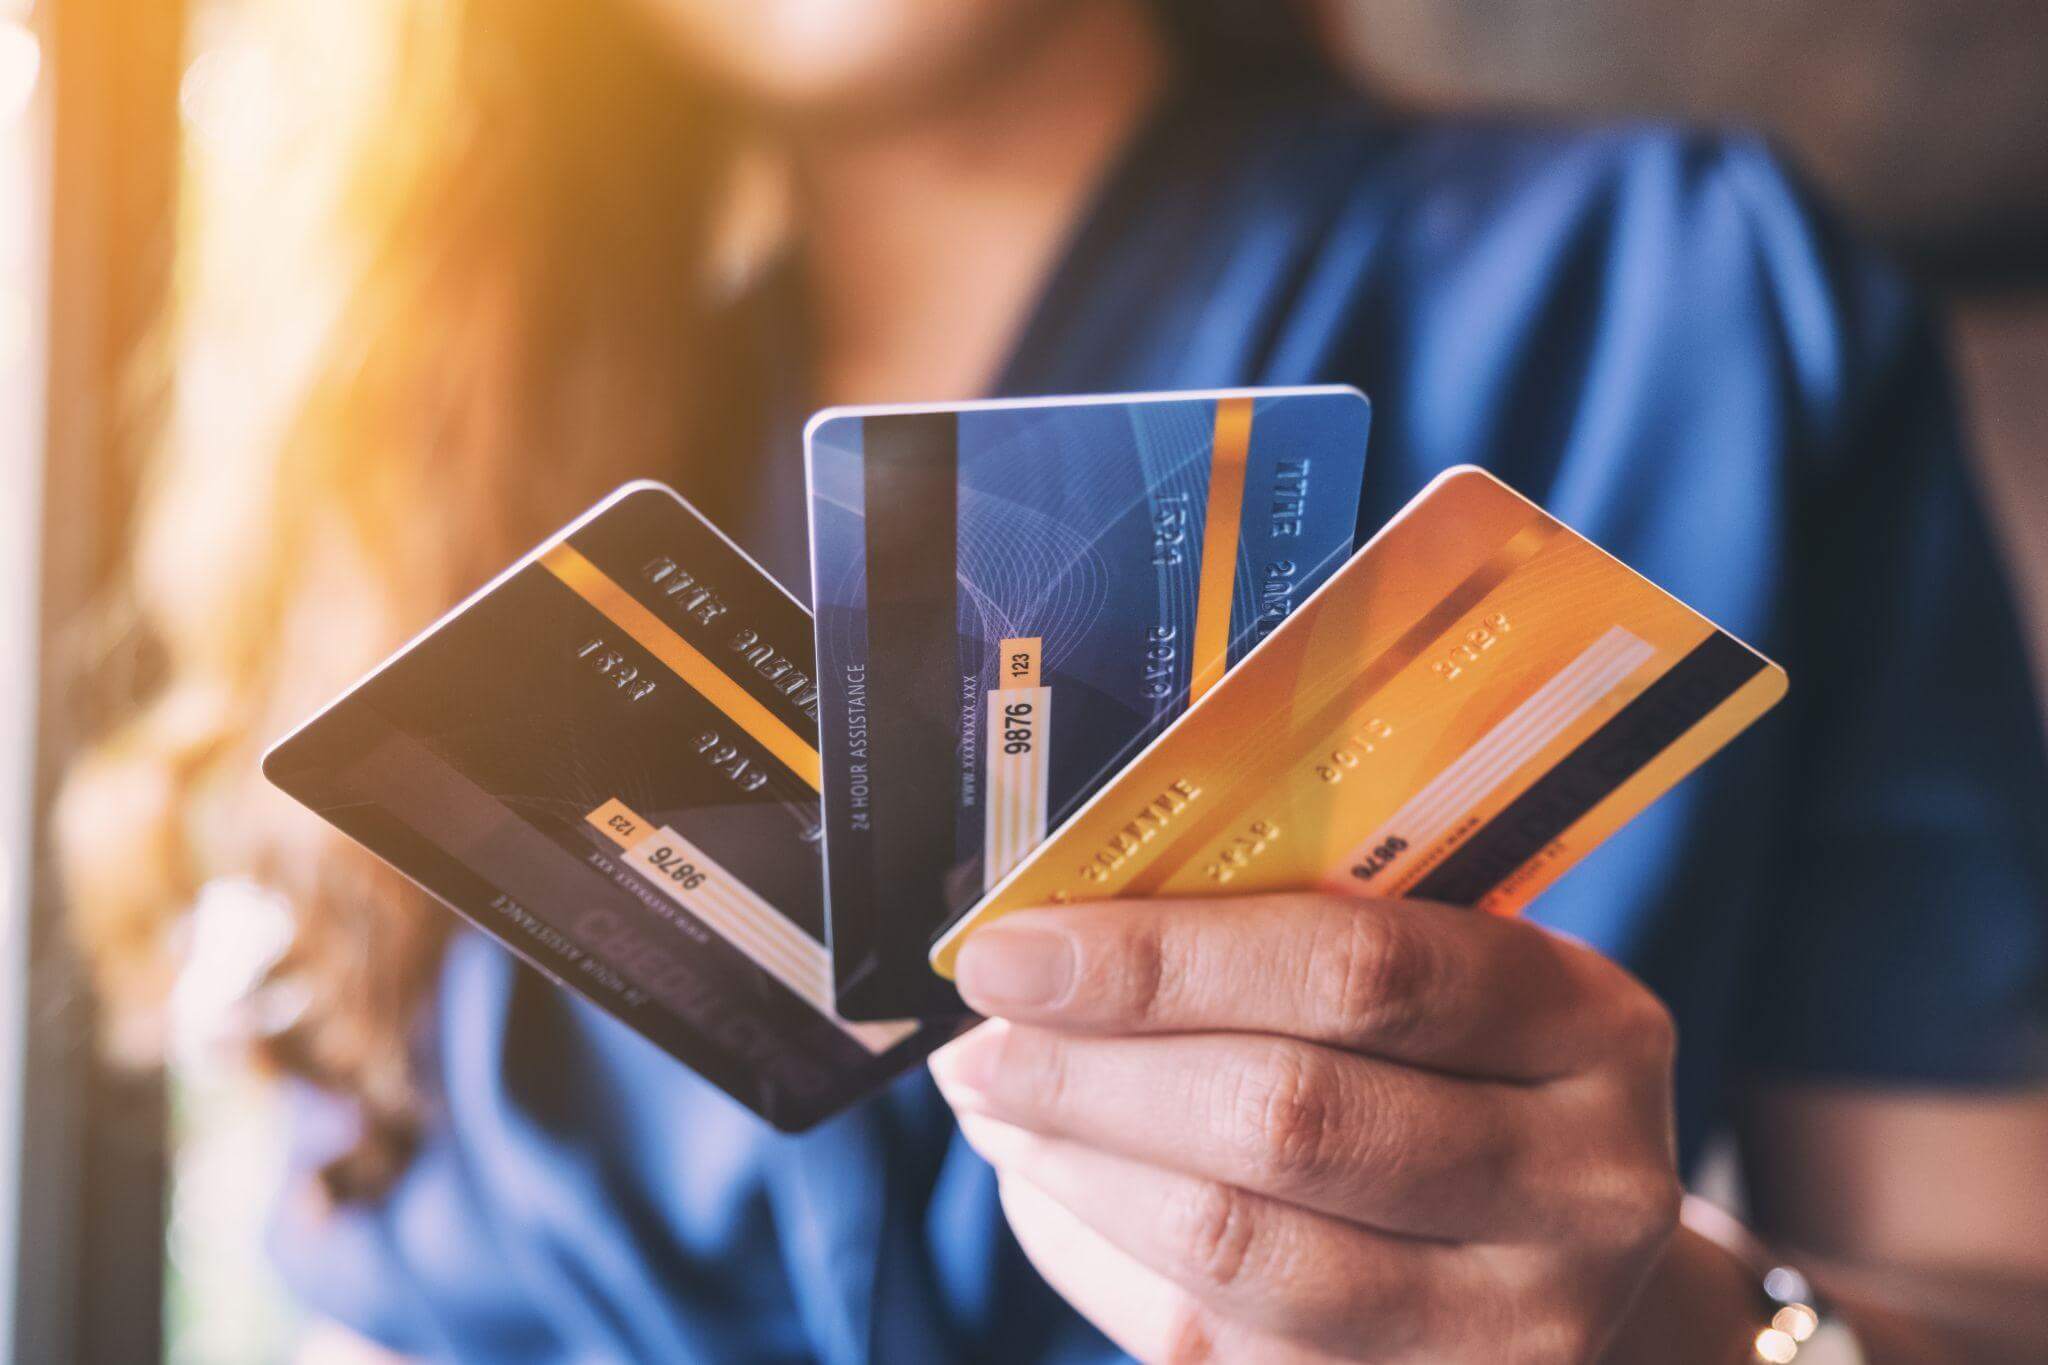 A close-up of a woman's hand holding and displaying multiple credit cards.